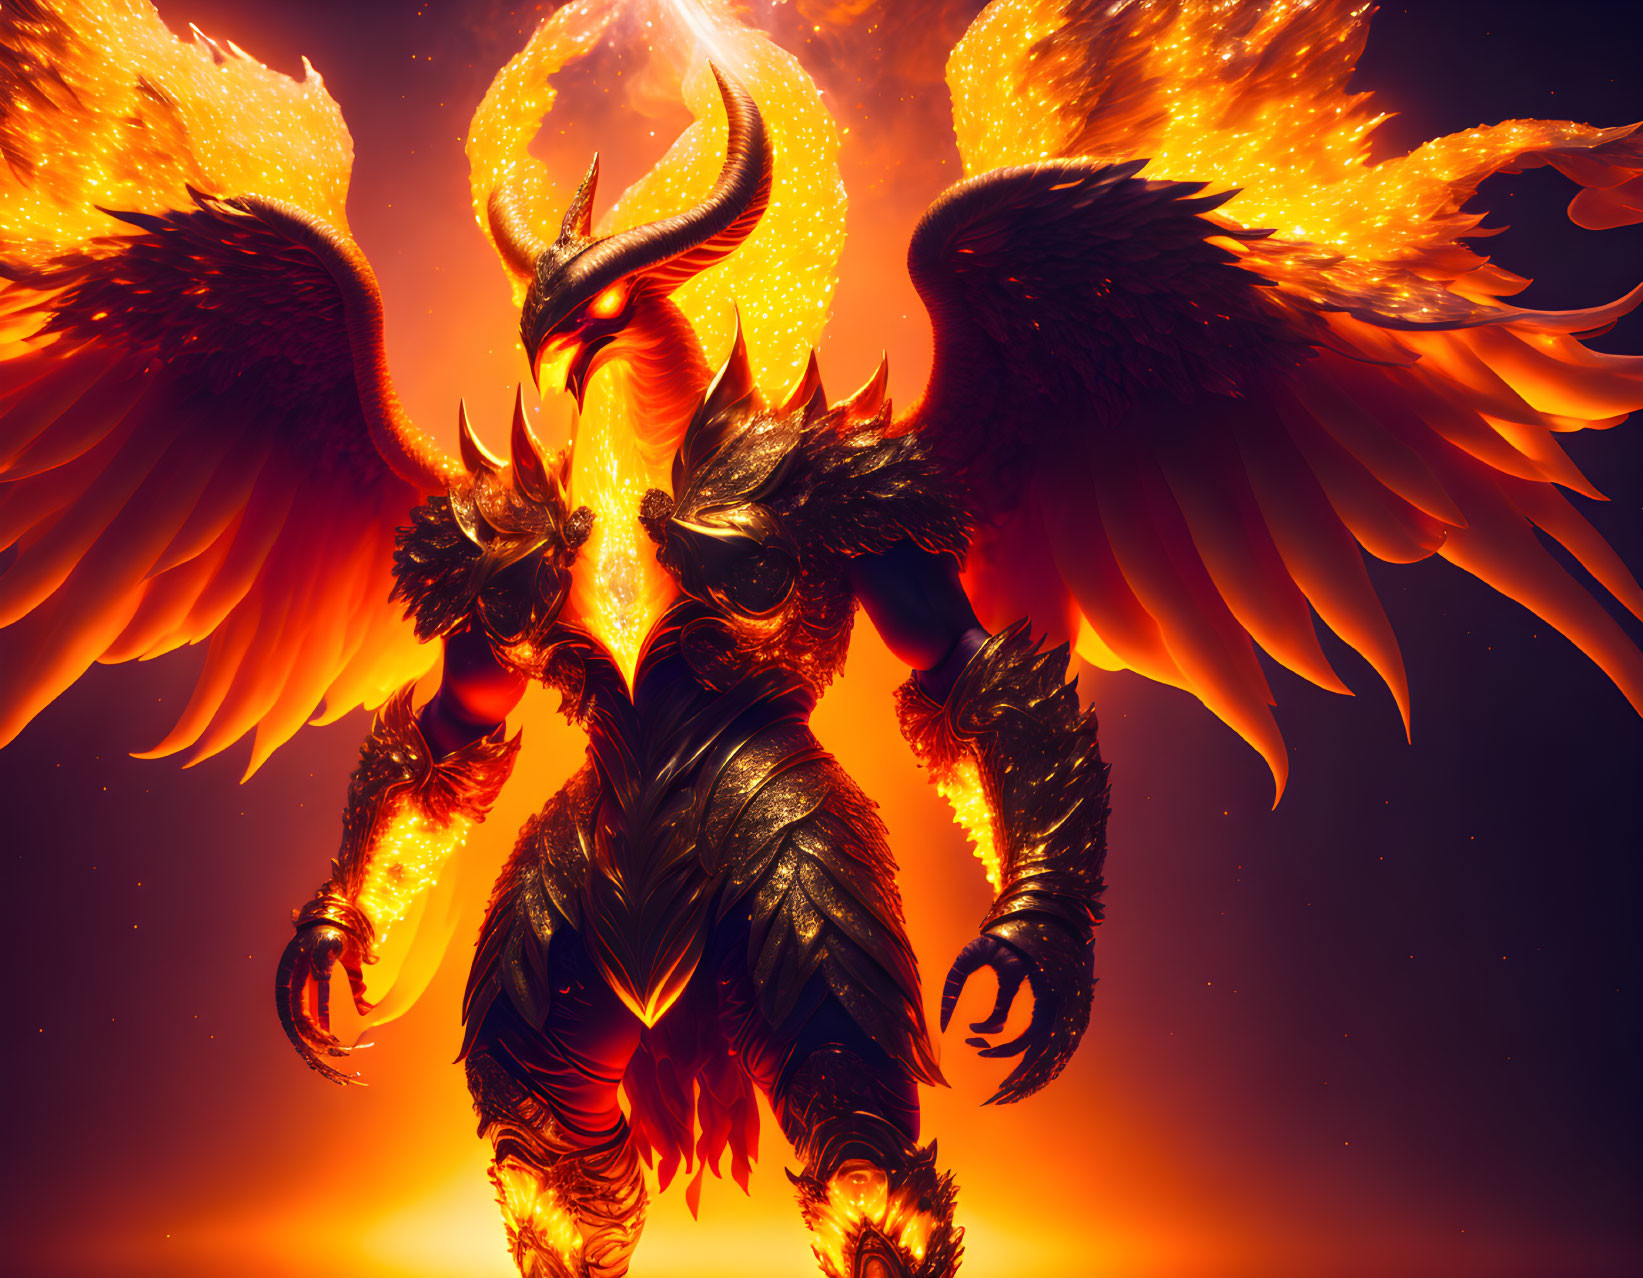 The Balrog possessed by the Phoenix